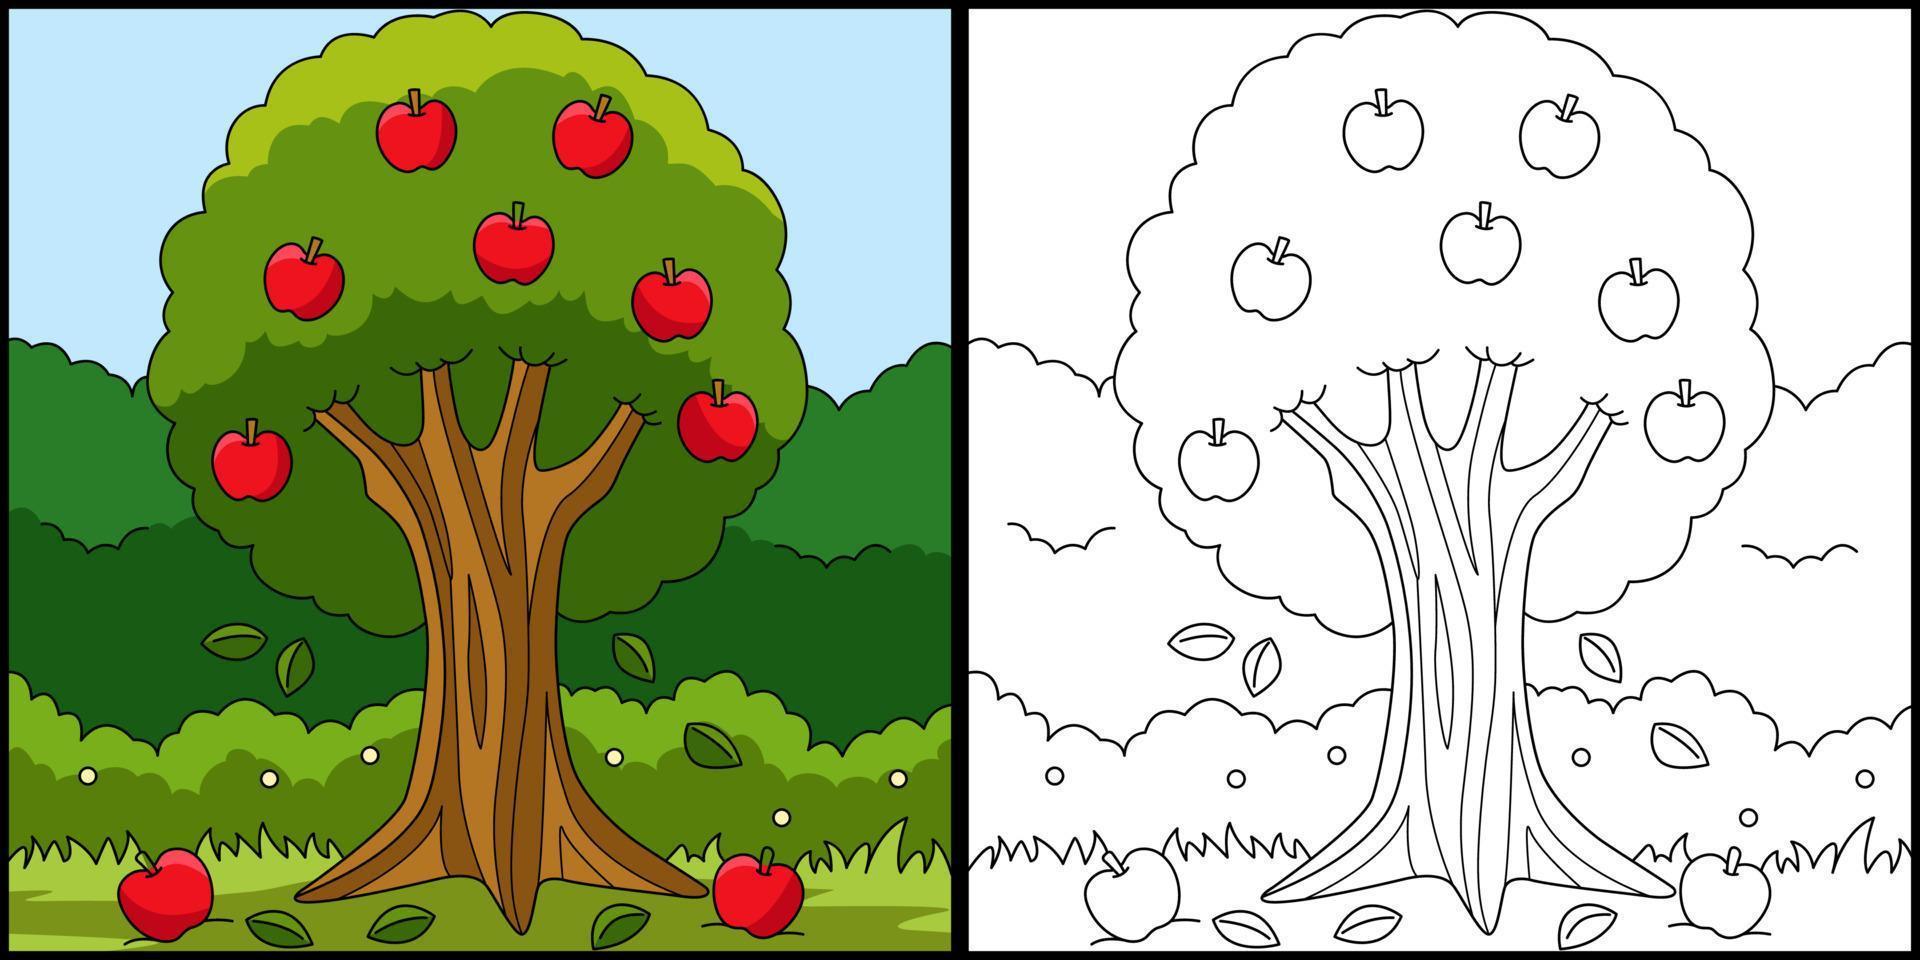 Apple Tree Coloring Page Colored Illustration vector